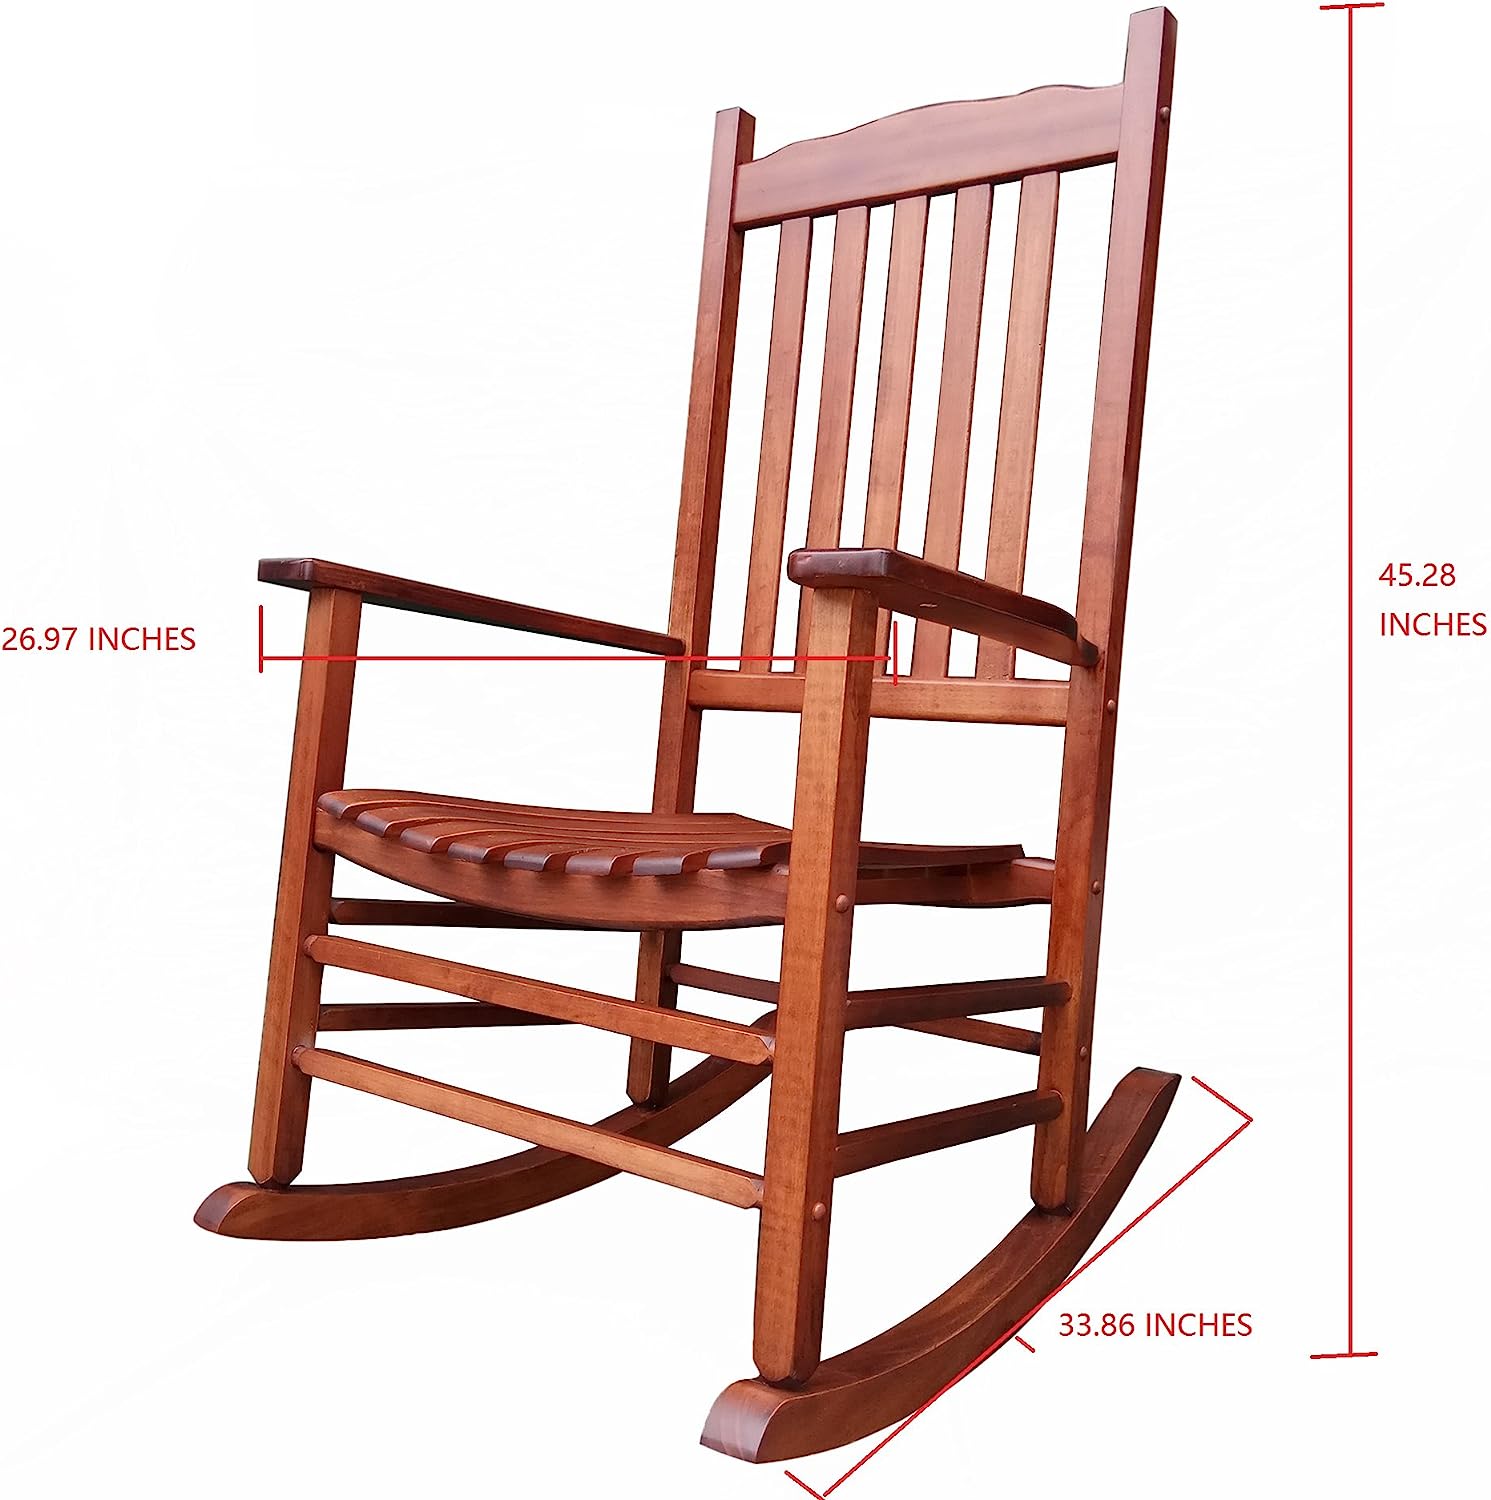 Natural Wood Porch Rocker/Outdoor Rocking Chair, Outdoor or Indoor, A001NT - $90